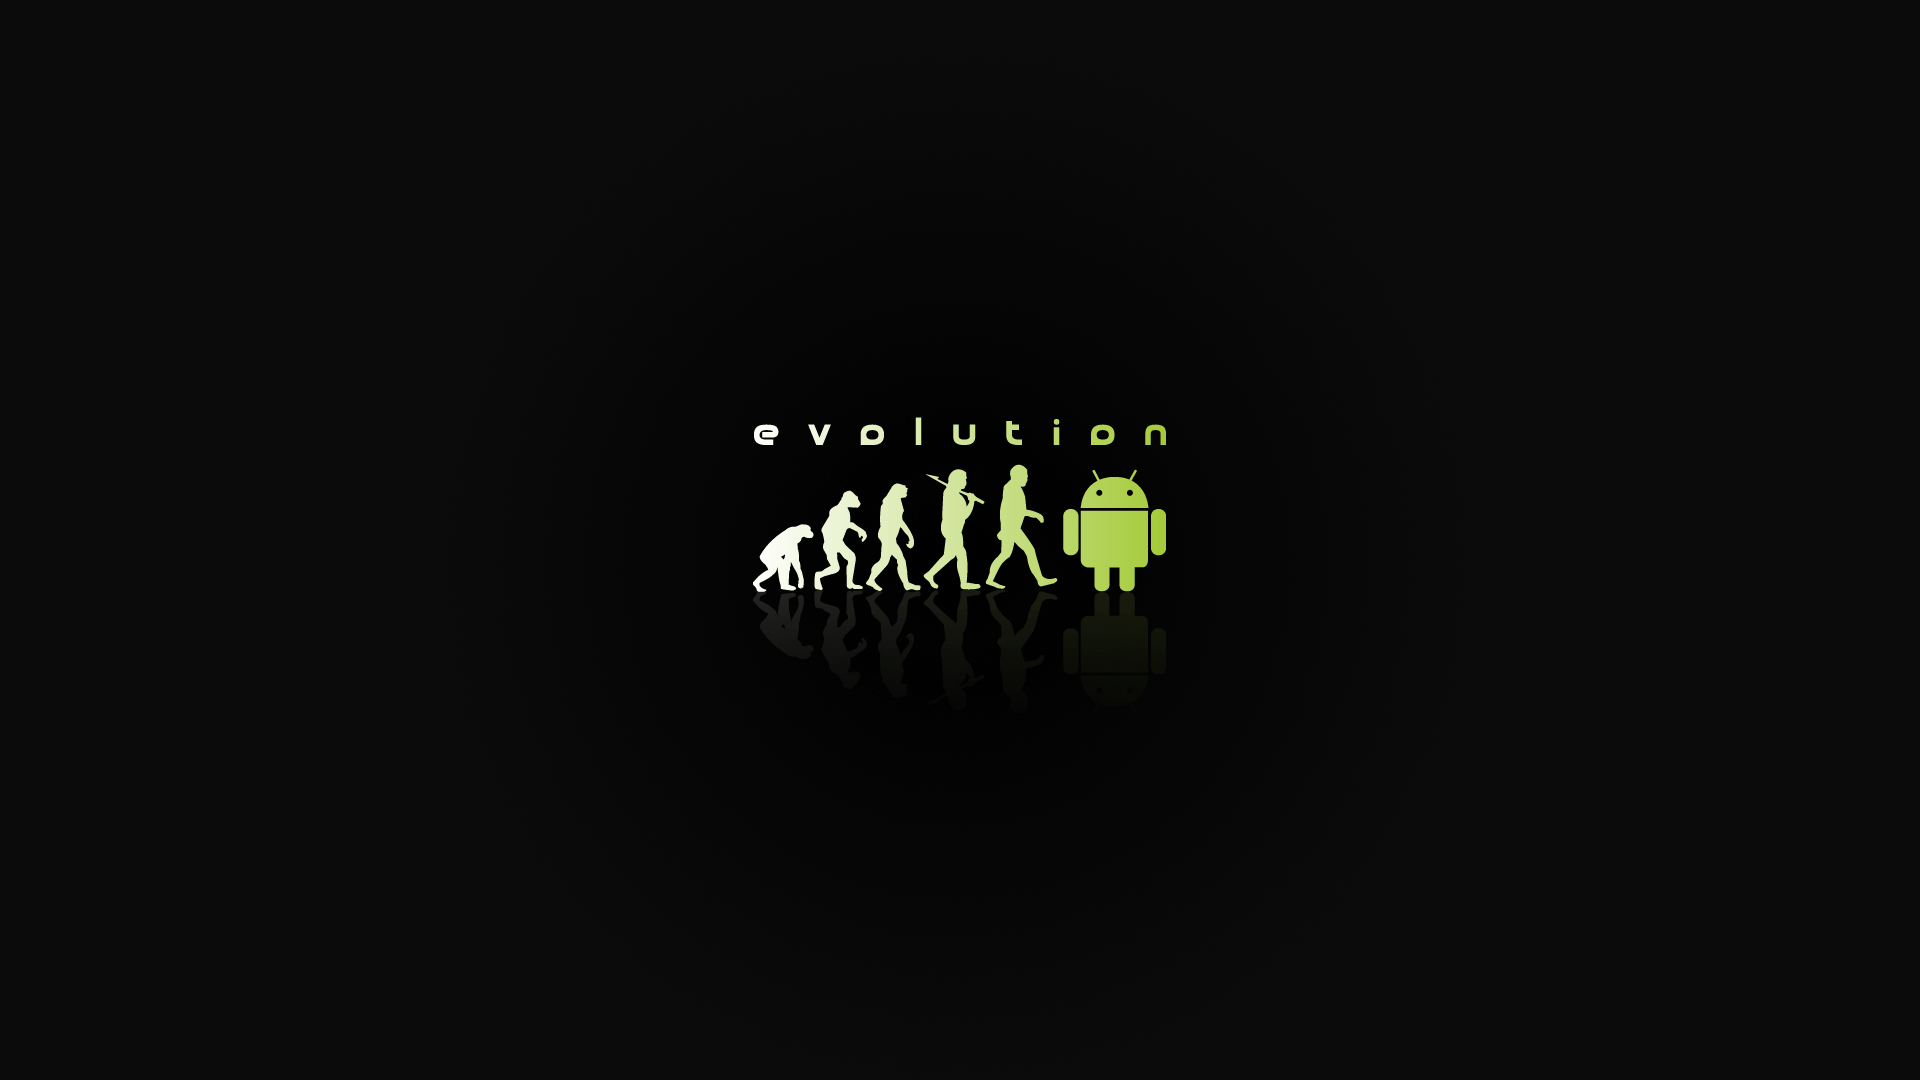 Wallpapers For > Android Vs Apple Wallpapers 1920x1080